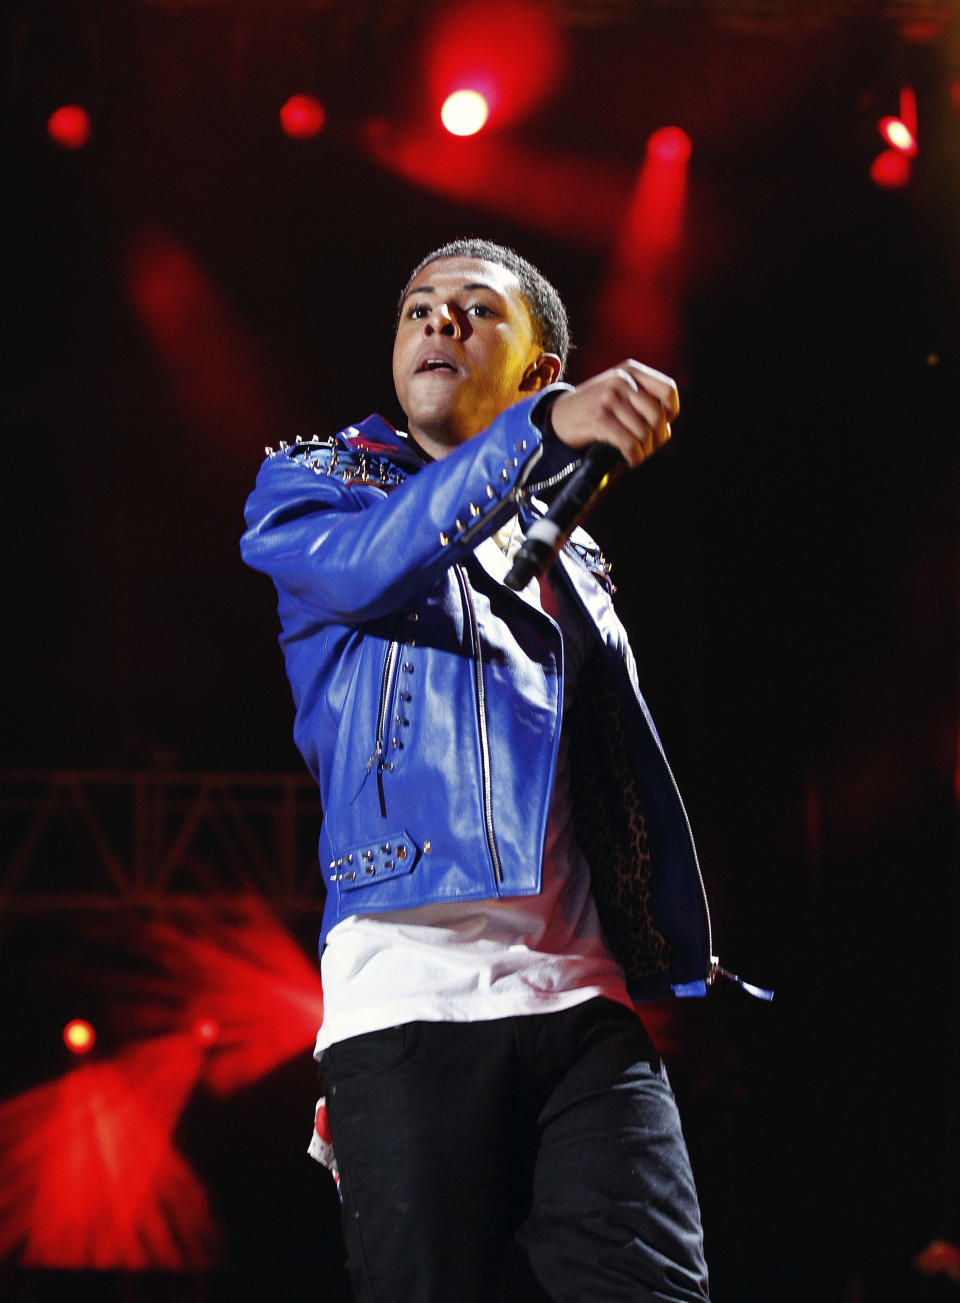 Diggy Simmons performs at the Essence Music Festival in New Orleans, Thursday, July 5, 2012. (Photo by Bill Haber/Invision/AP)